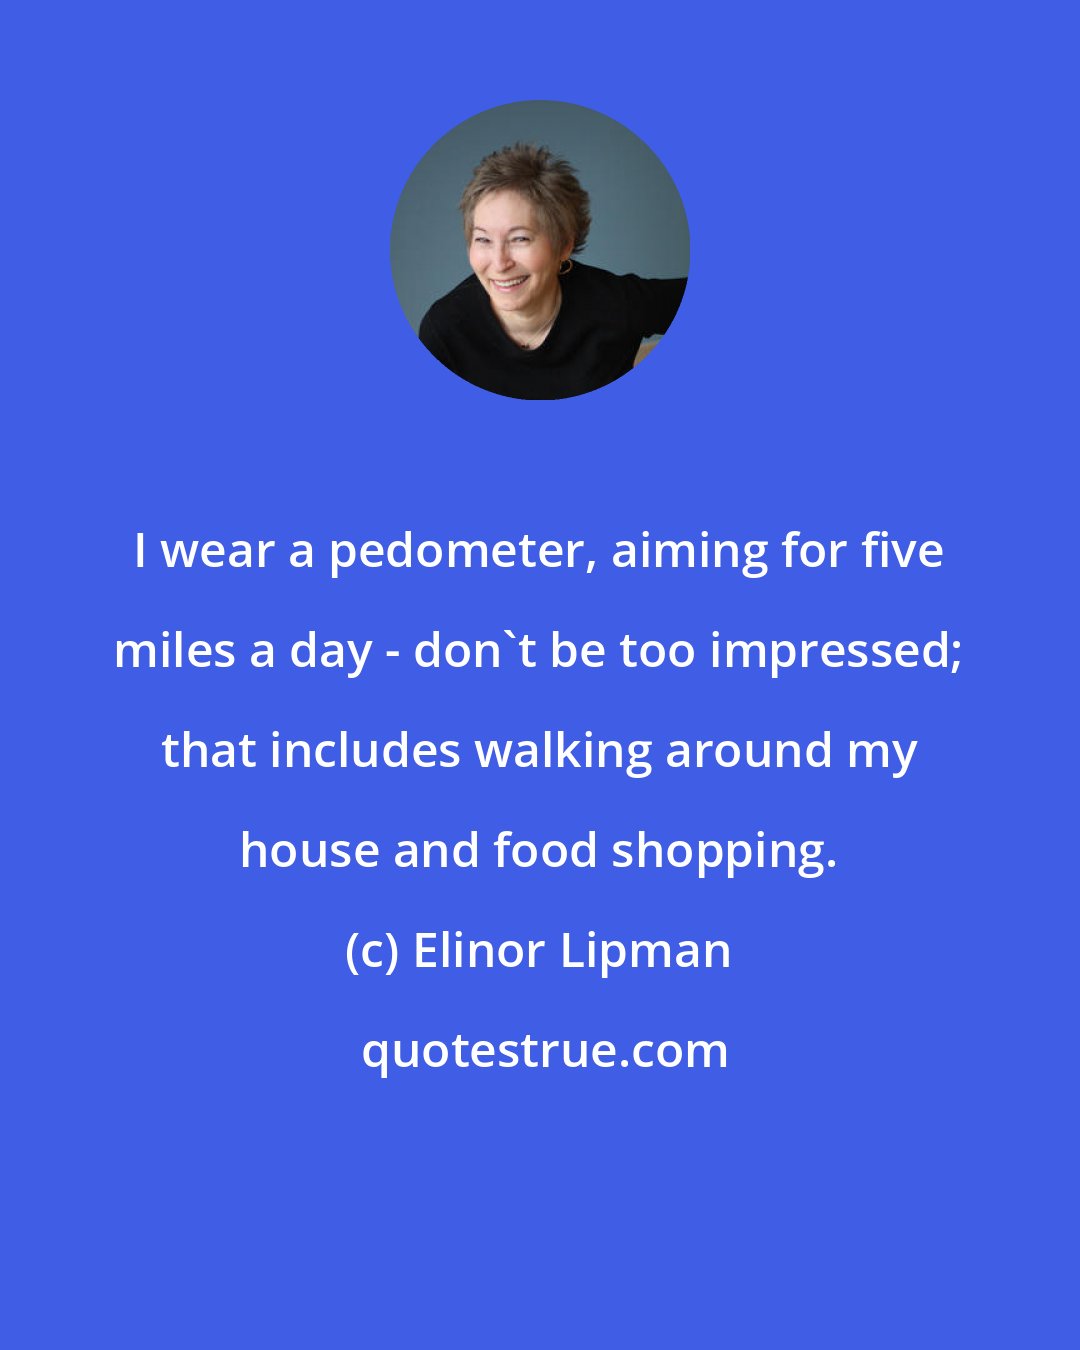 Elinor Lipman: I wear a pedometer, aiming for five miles a day - don't be too impressed; that includes walking around my house and food shopping.